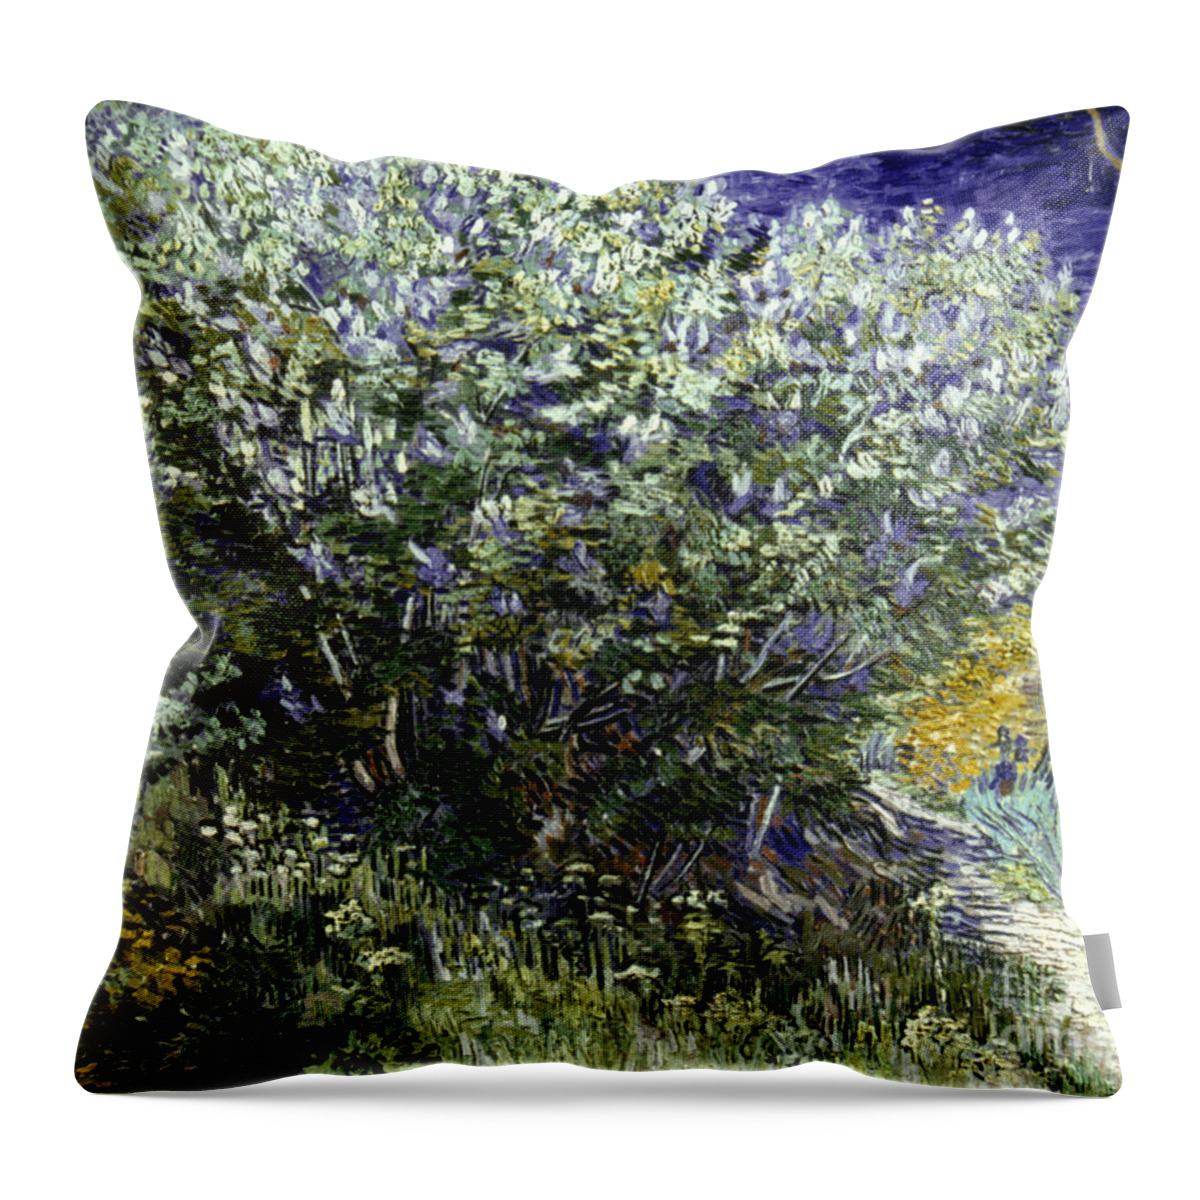 19th Century Throw Pillow featuring the photograph VAN GOGH: LILACS, 19th C by Granger